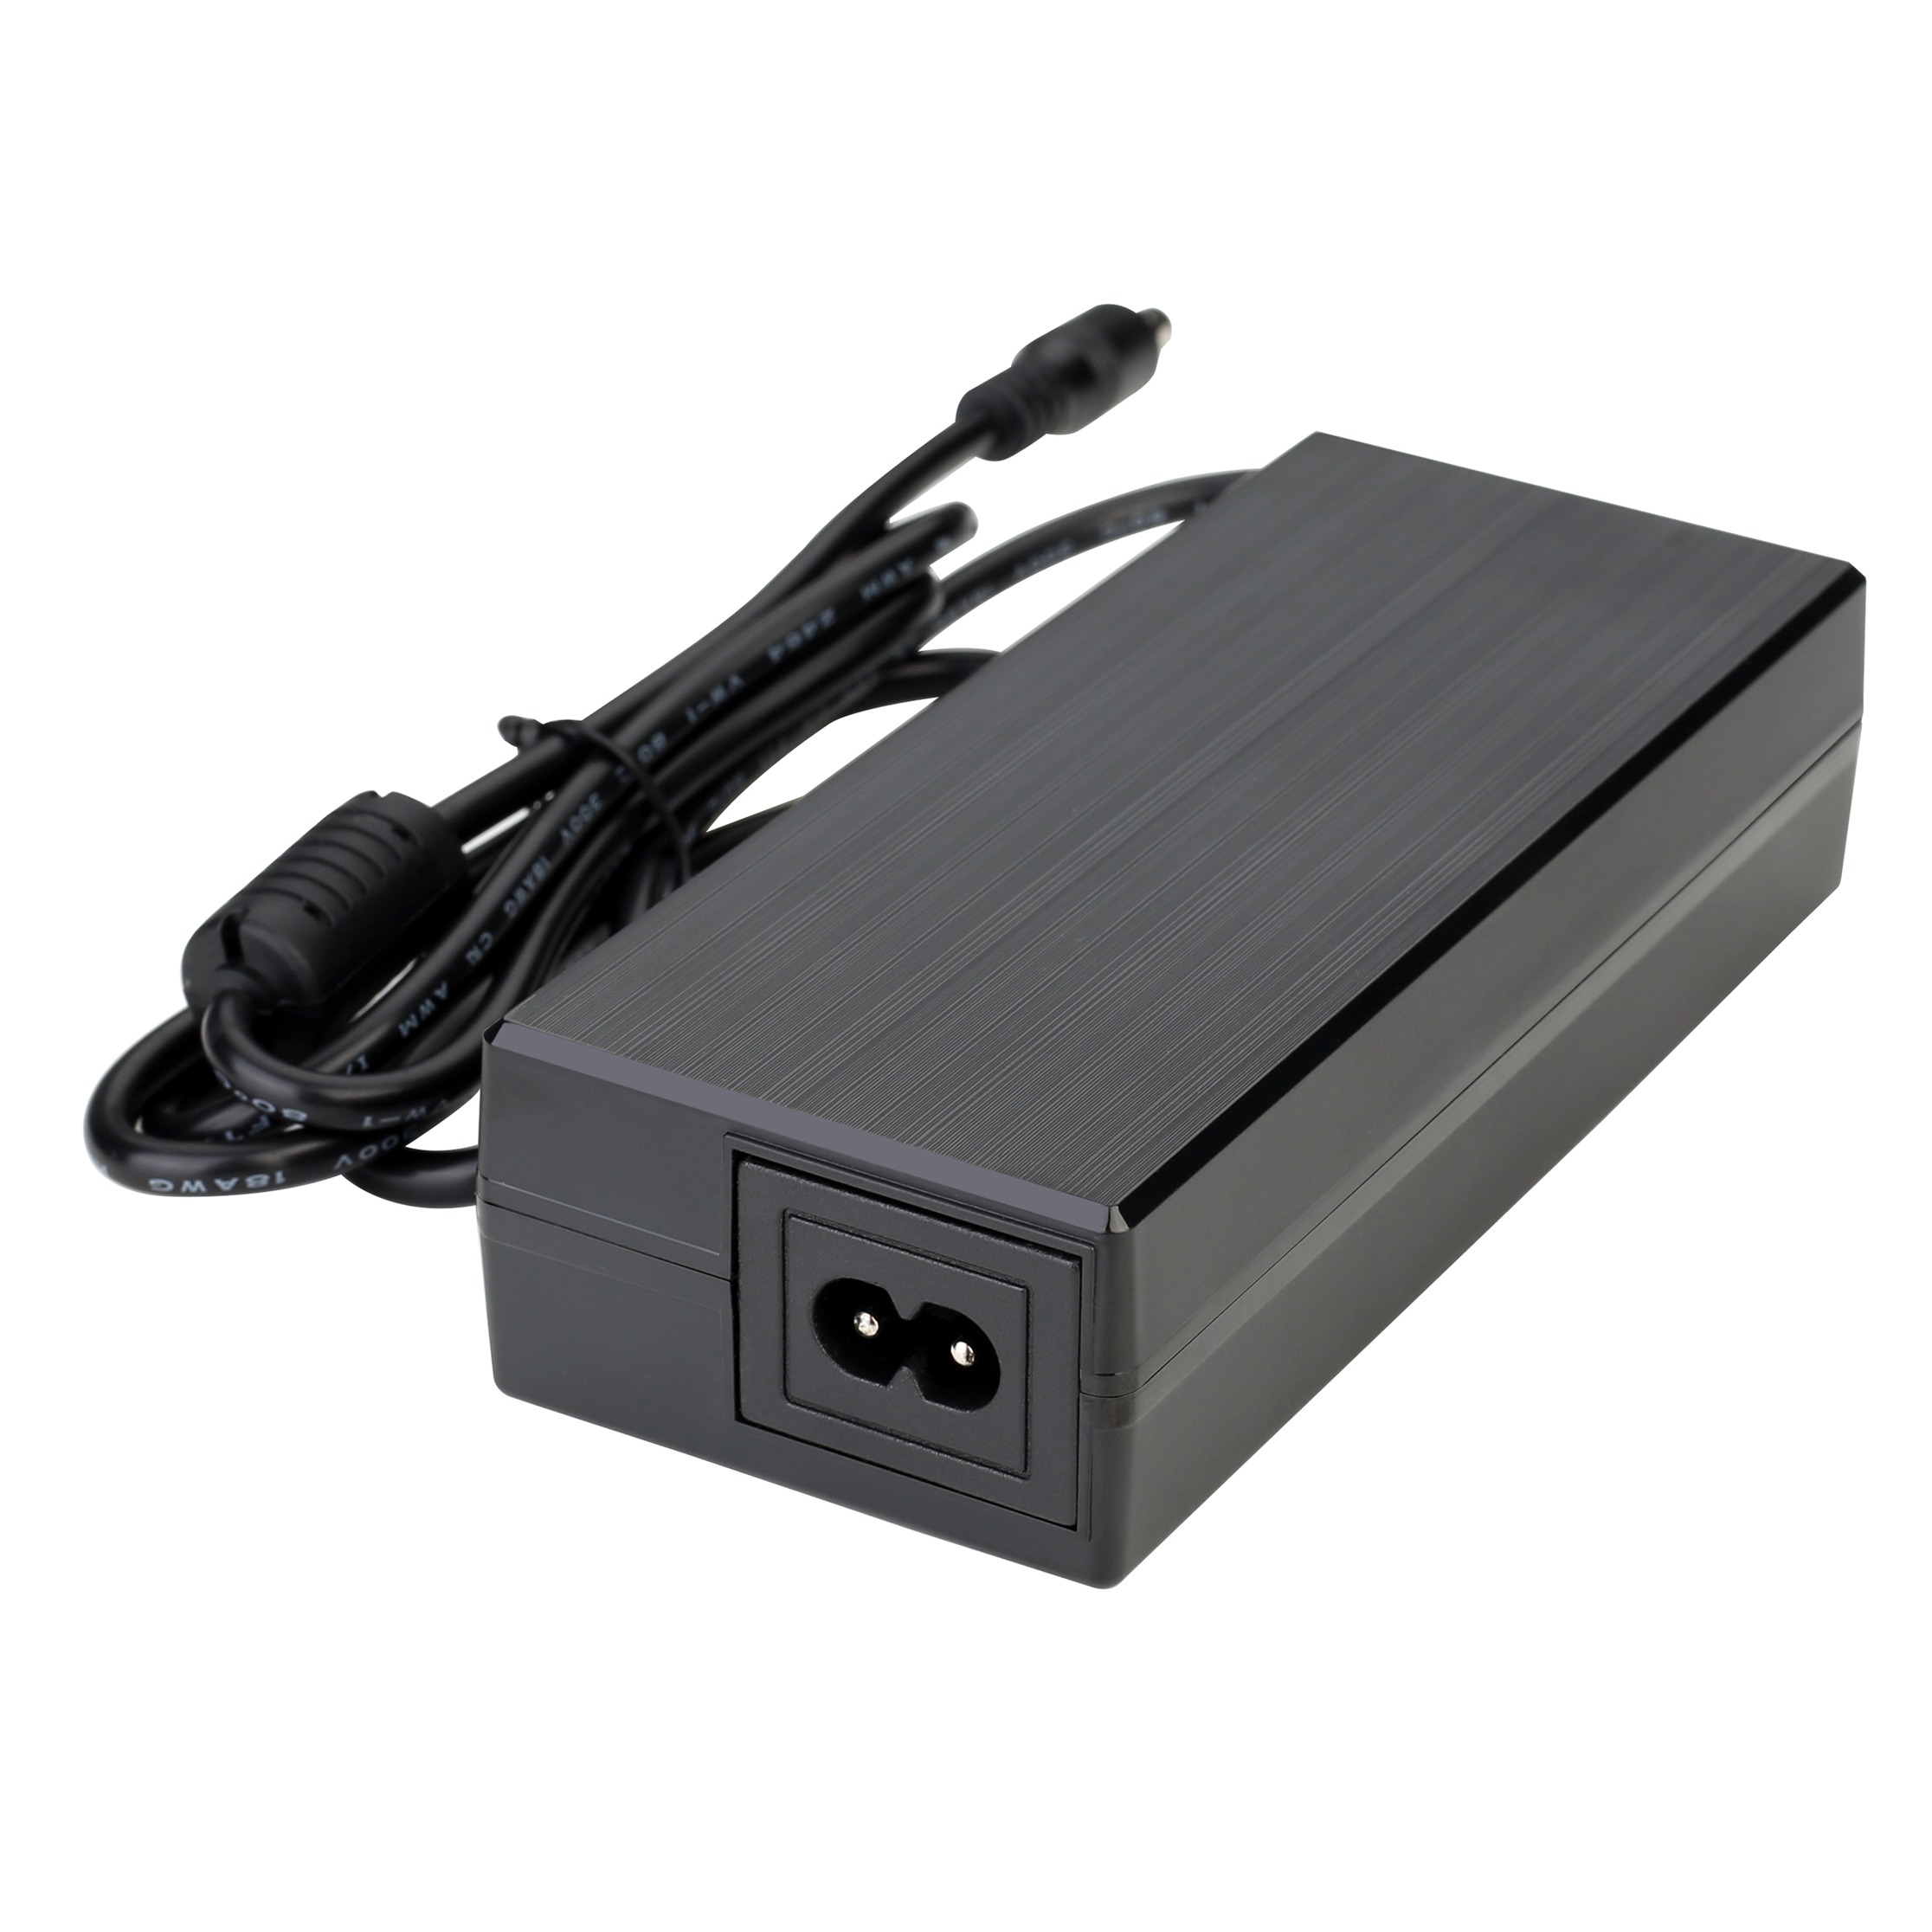 Common types and advantages and disadvantages of high-power battery chargers